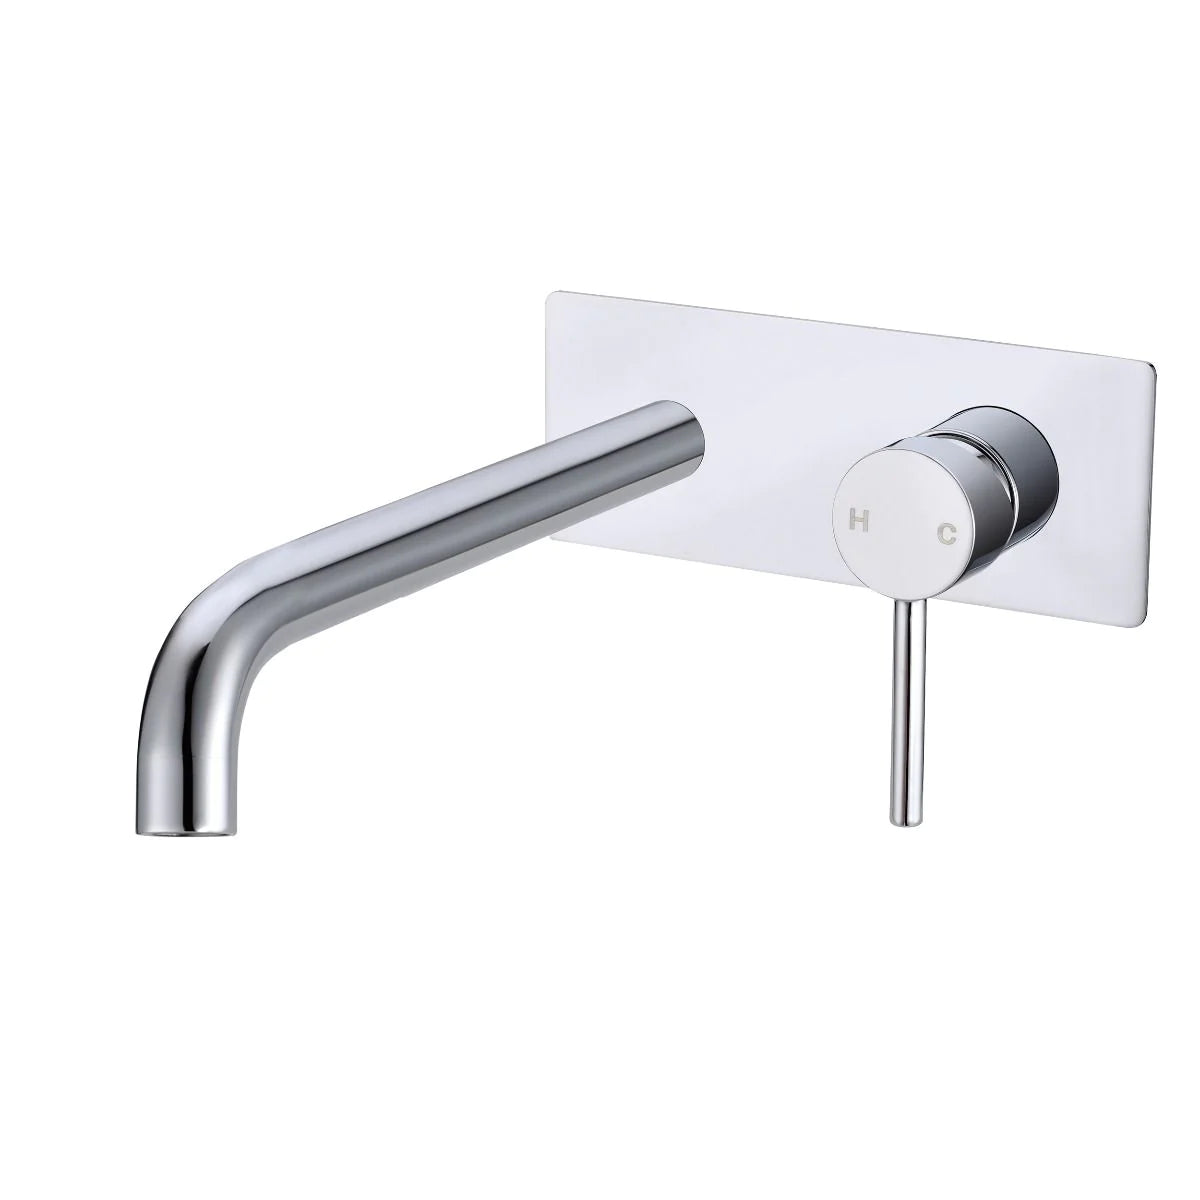 Norico Pentro wall mixer with round spout, boasting a modern and minimalist design-WMT44.01